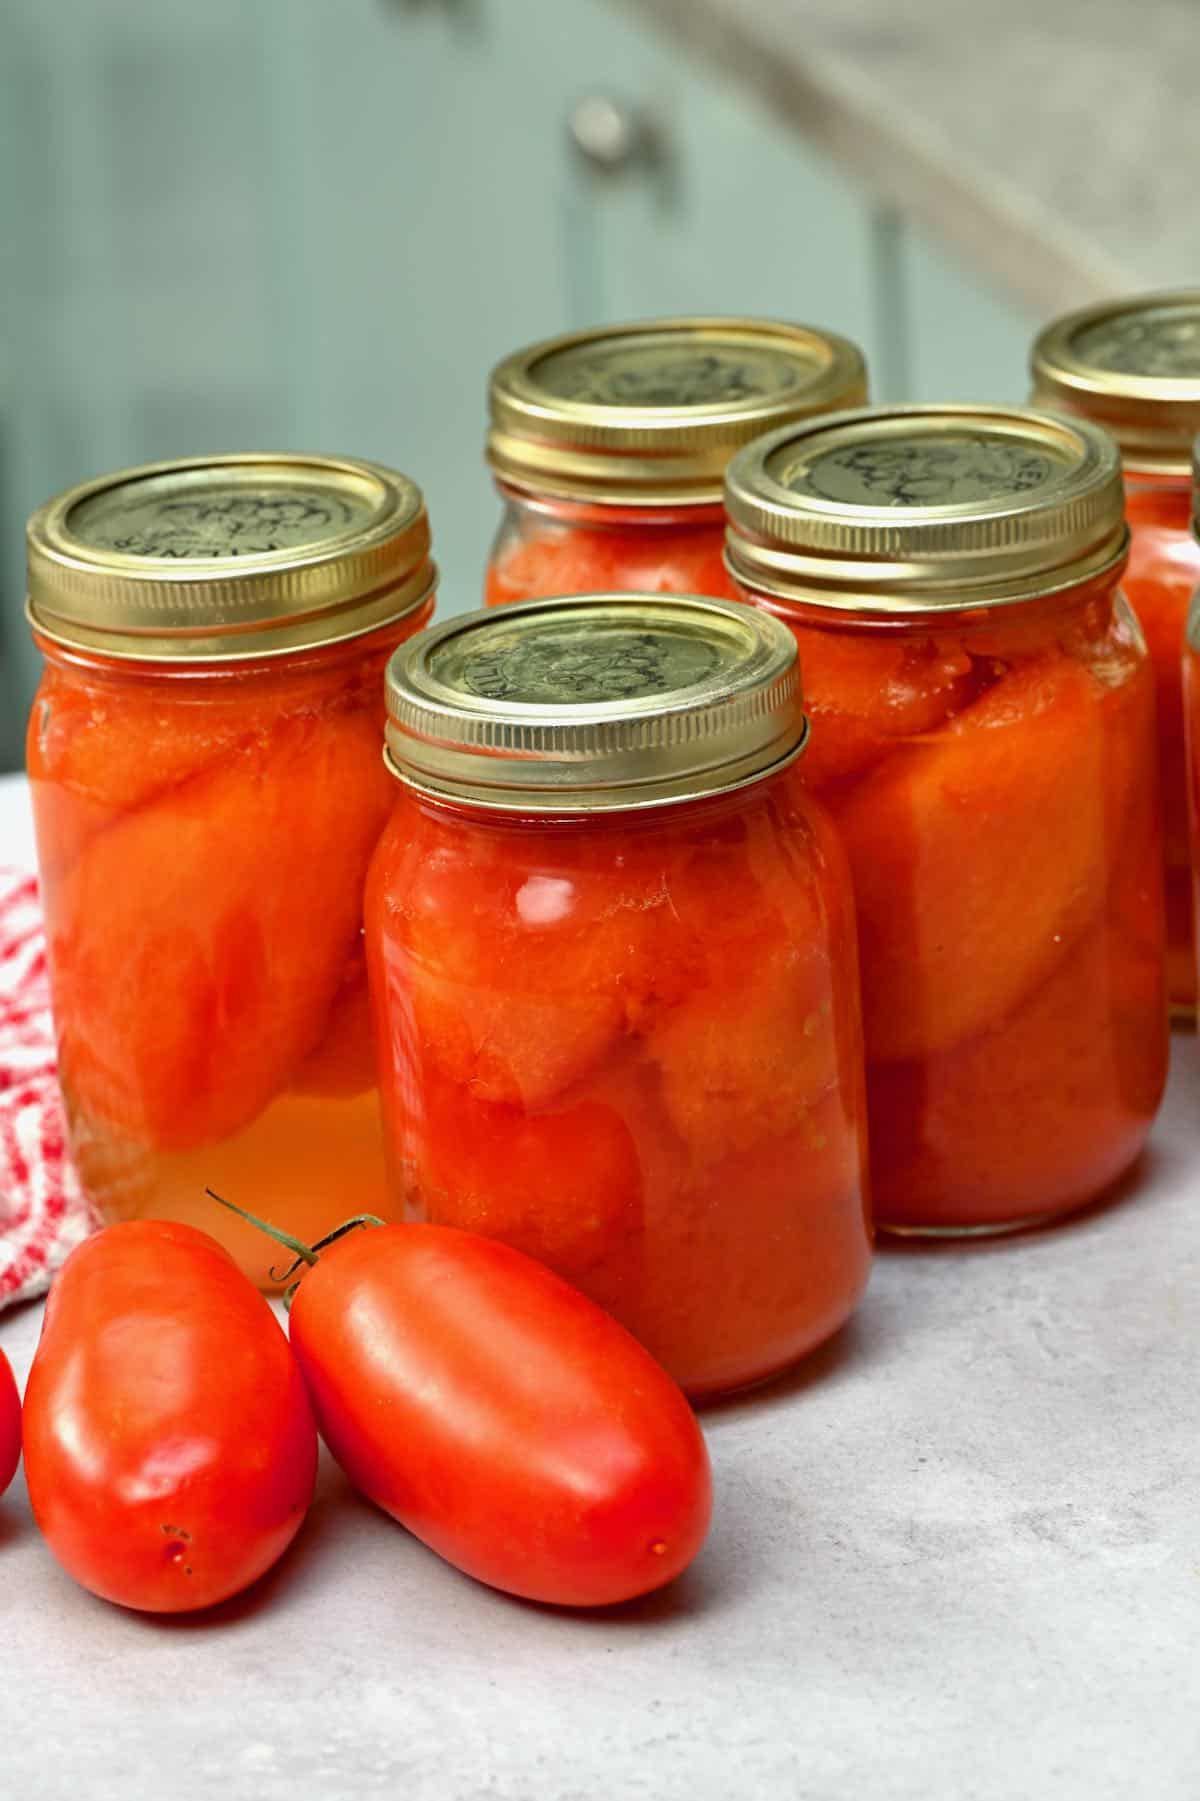 jars of canned whole tomatoes on a grey background